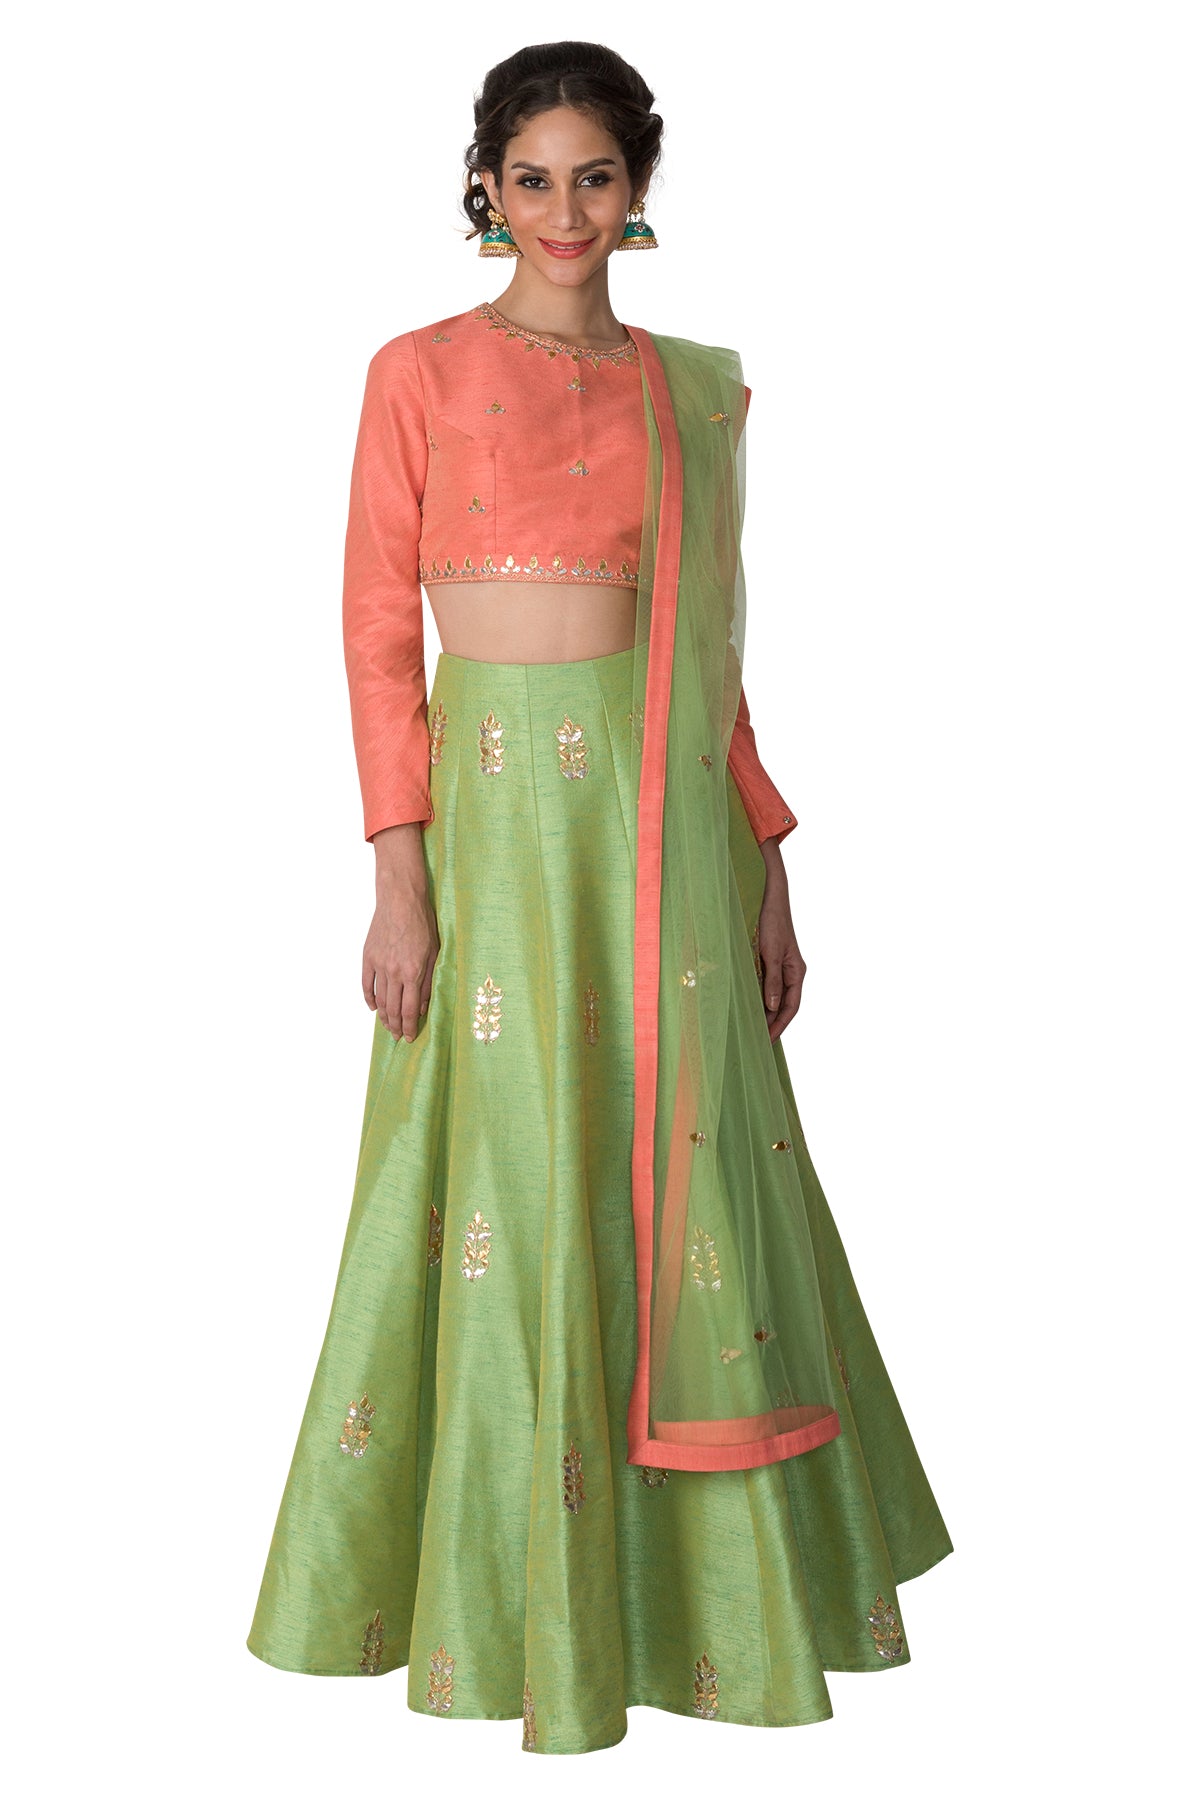 Peach blouse with green skirt and Dupatta